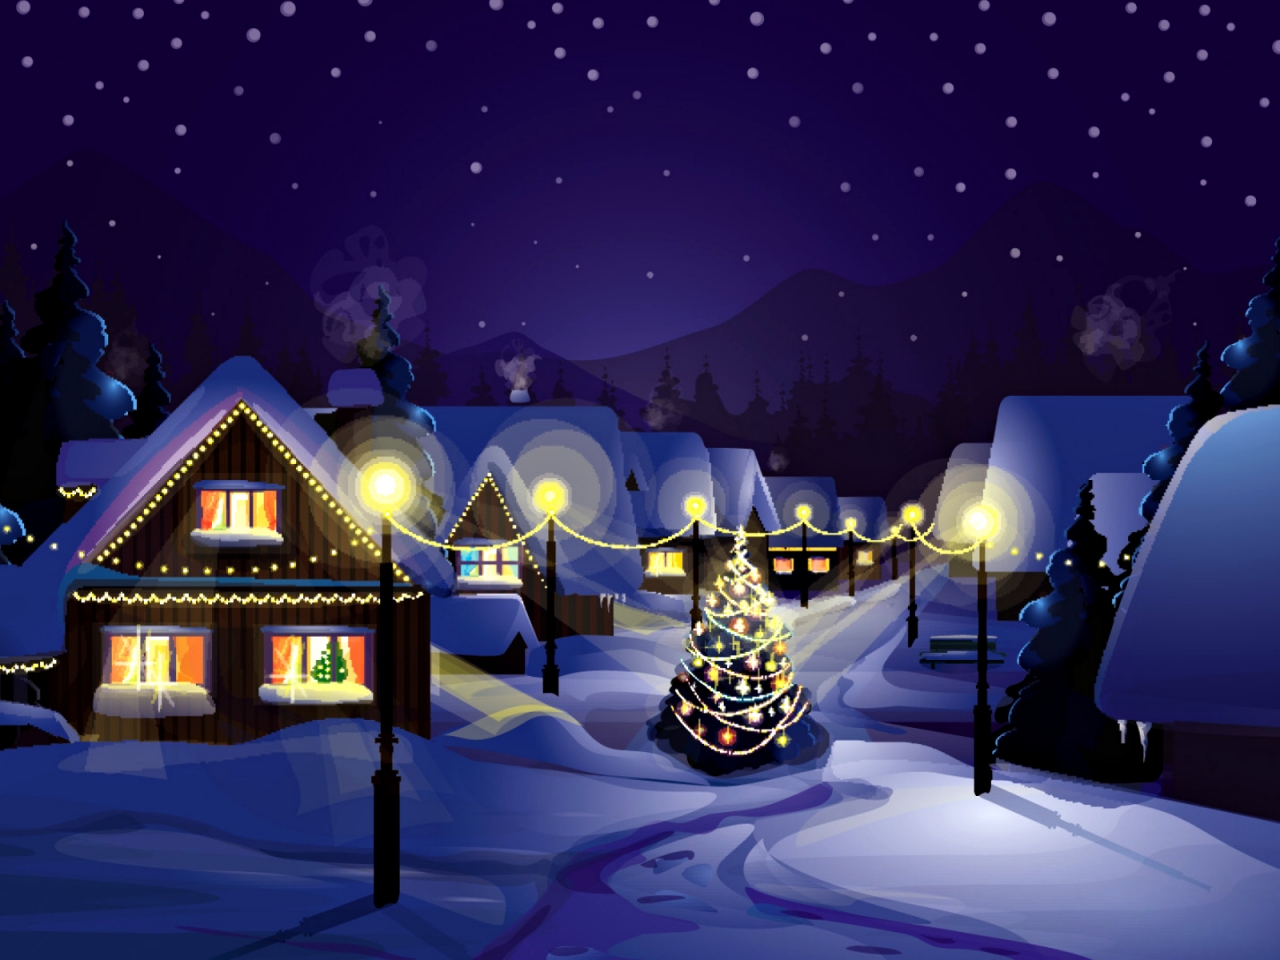 Christmas Village for 1280 x 960 resolution